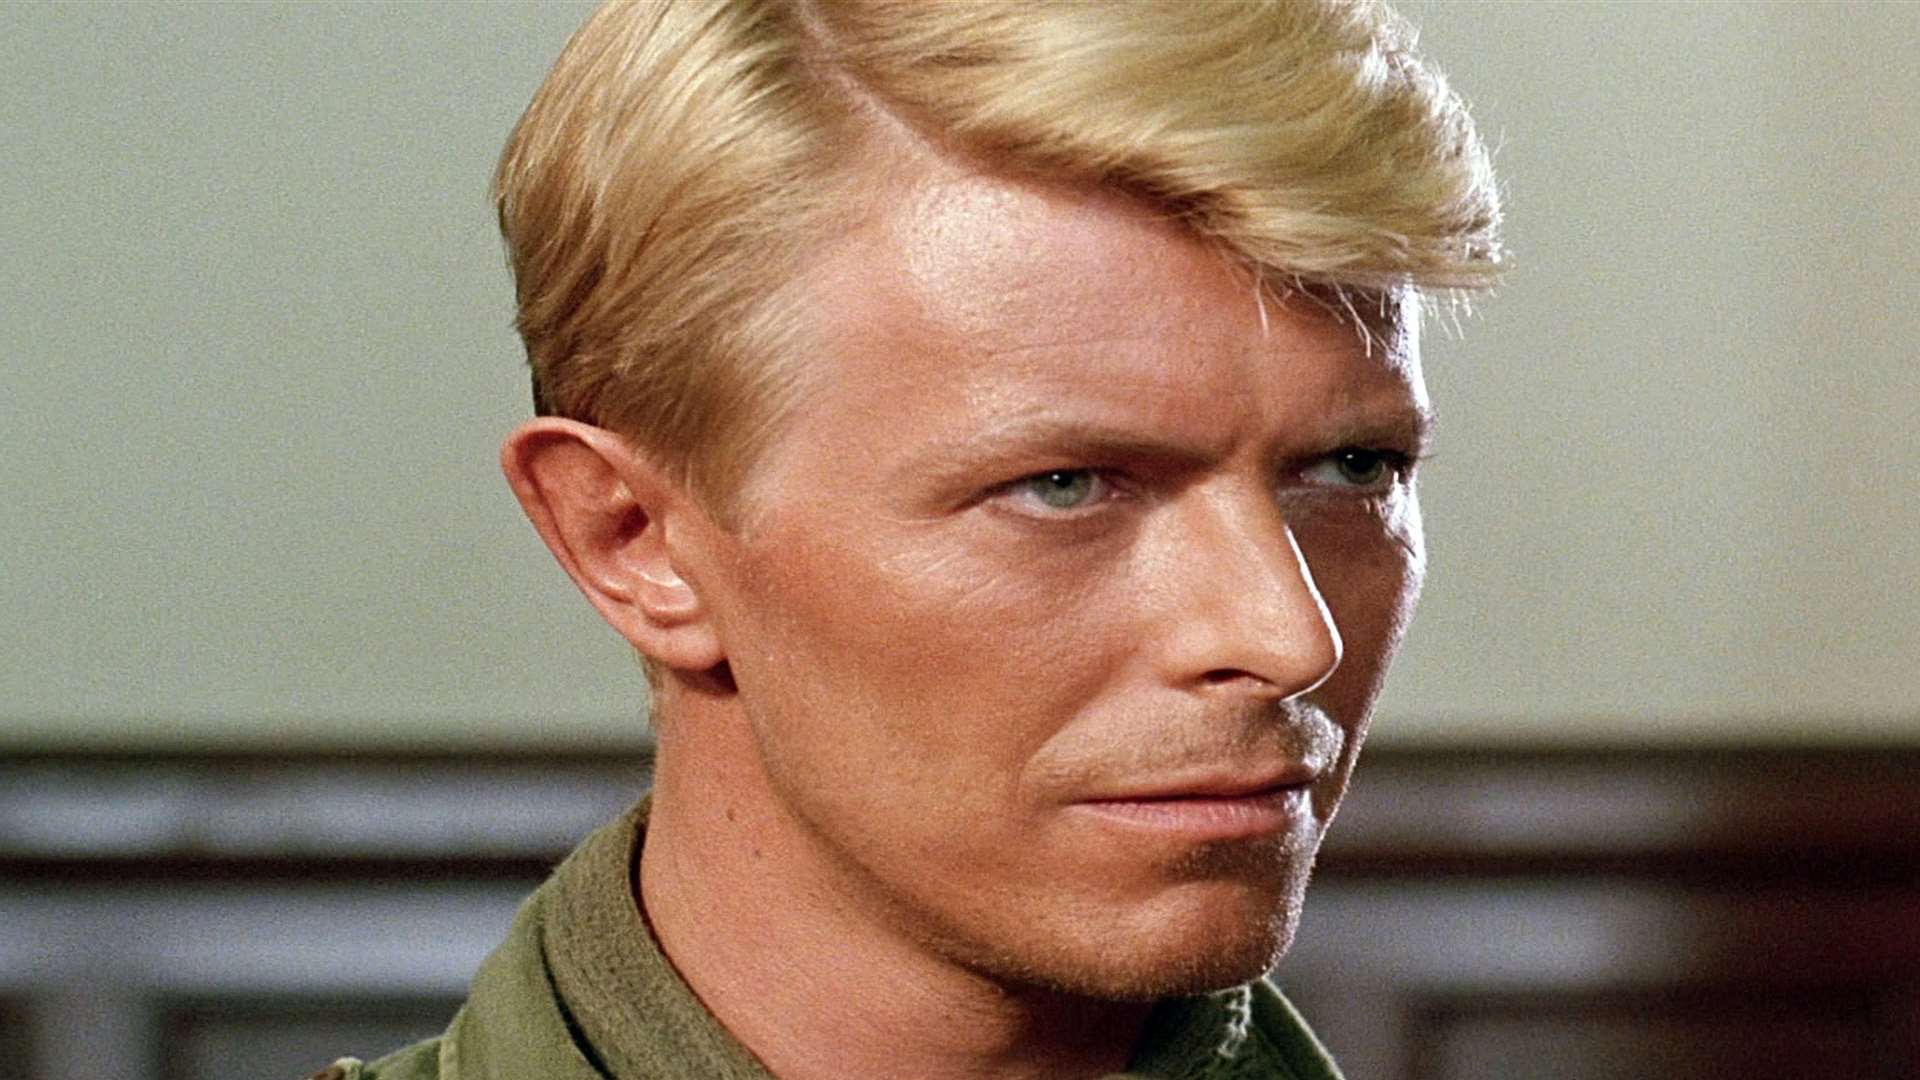 David Bowie in Merry Christmas Mr Lawrence (1983)